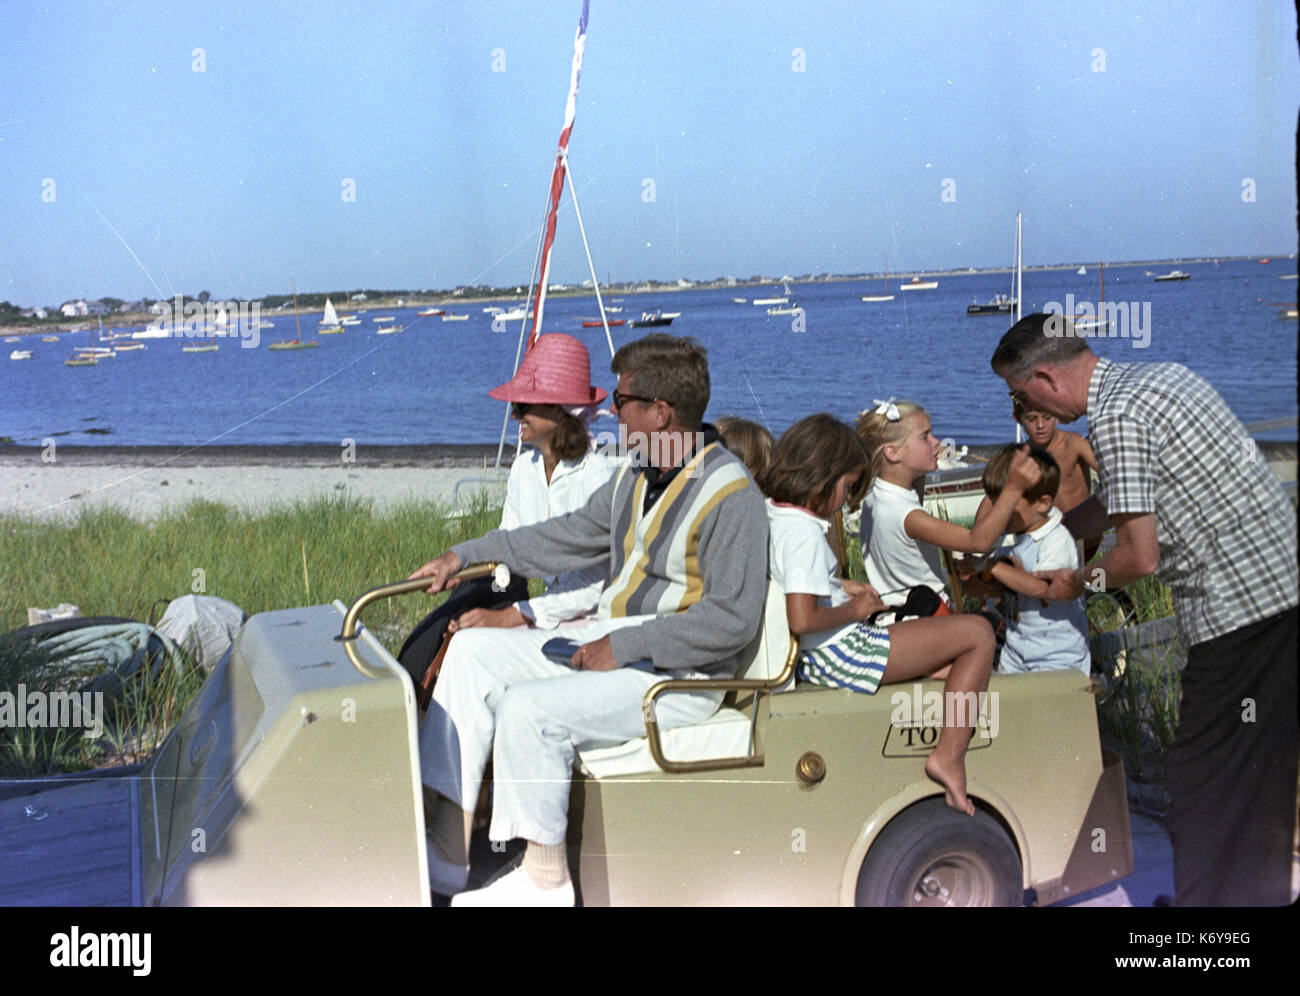 31 August 1963 President John F. Kennedy riding in a golf car after a cruise on the on the Honey Fitz  in Hyannisport, MA, August 31, 1963.  Also pictured are Jacqueline Kennedy, Maria Shriver, Sydney Lawford, Tim Shriver, and John F. Kennedy, Jr.  A secret service man is helping John Jr. to get onto the golf cart. Photograph by Cecil Stoughton. Stock Photo